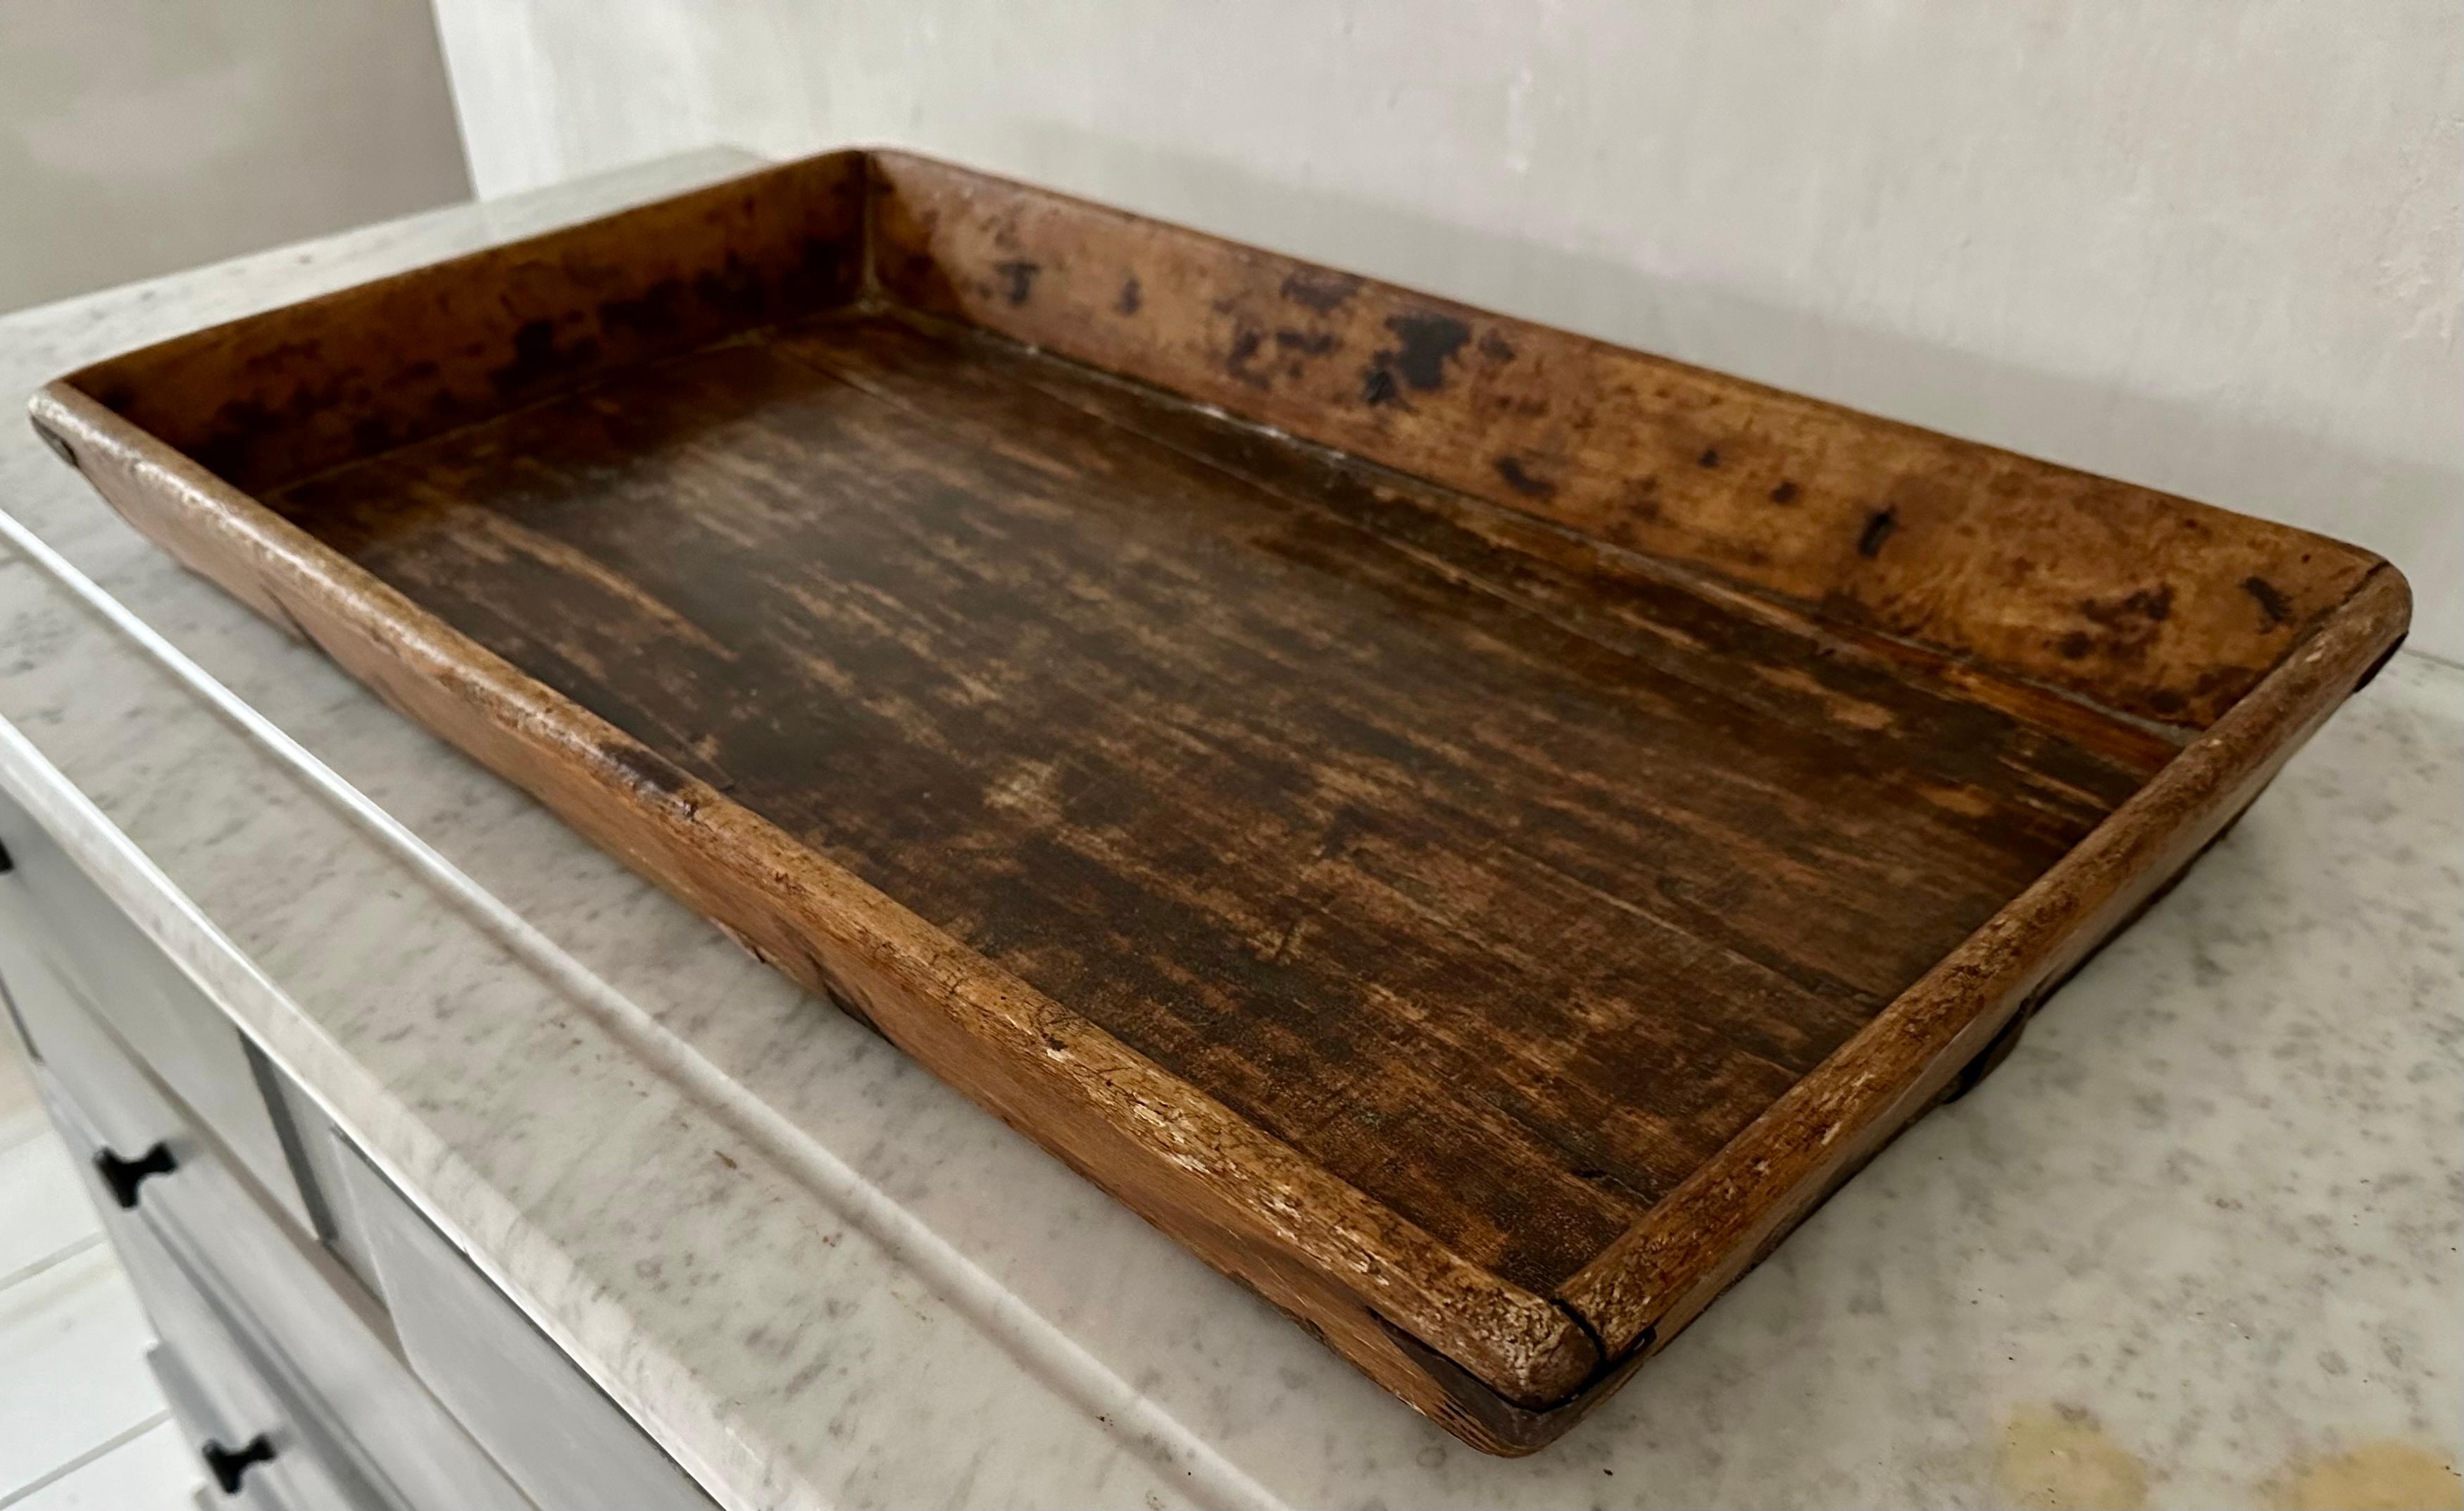 The organic rustic vintage Chinese country style serving tray, once a common item in most households can now add timeless appeal to modern interiors as a sculptural object, coffee table catch-all or serving platter. Well used in time but has